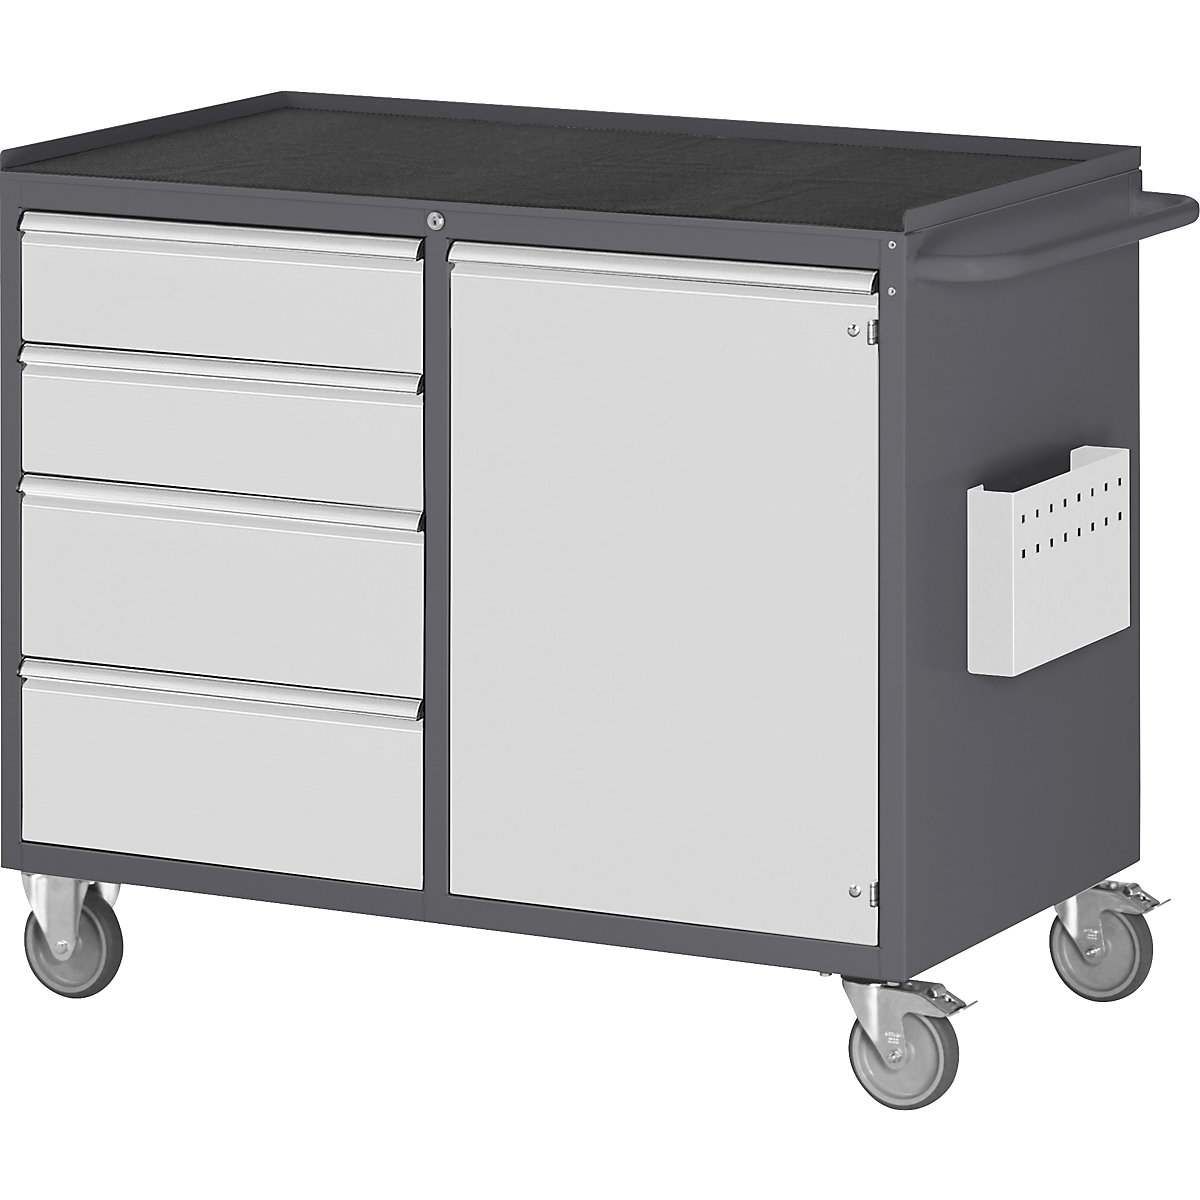 Compact workbenches, mobile – RAU, 4 drawers, 1 door, metal tray with rubber mat, charcoal / light grey-2